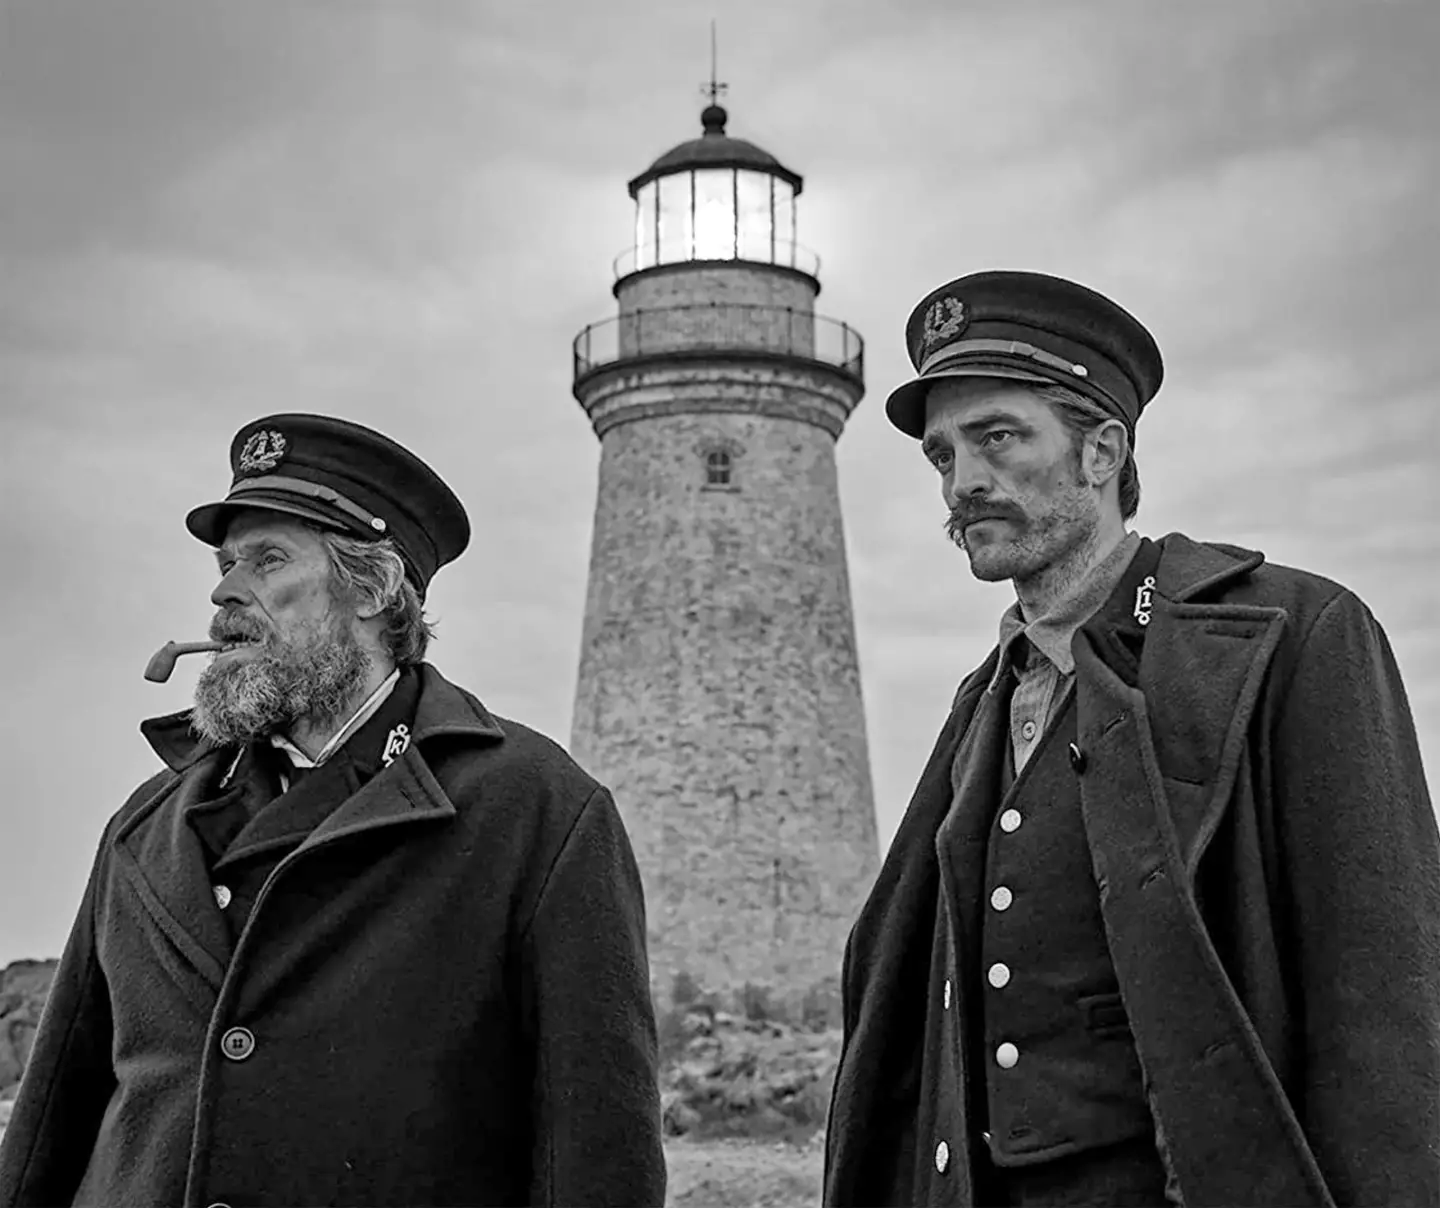 The film has a surreal sequence, similar to 2019's The Lighthouse.